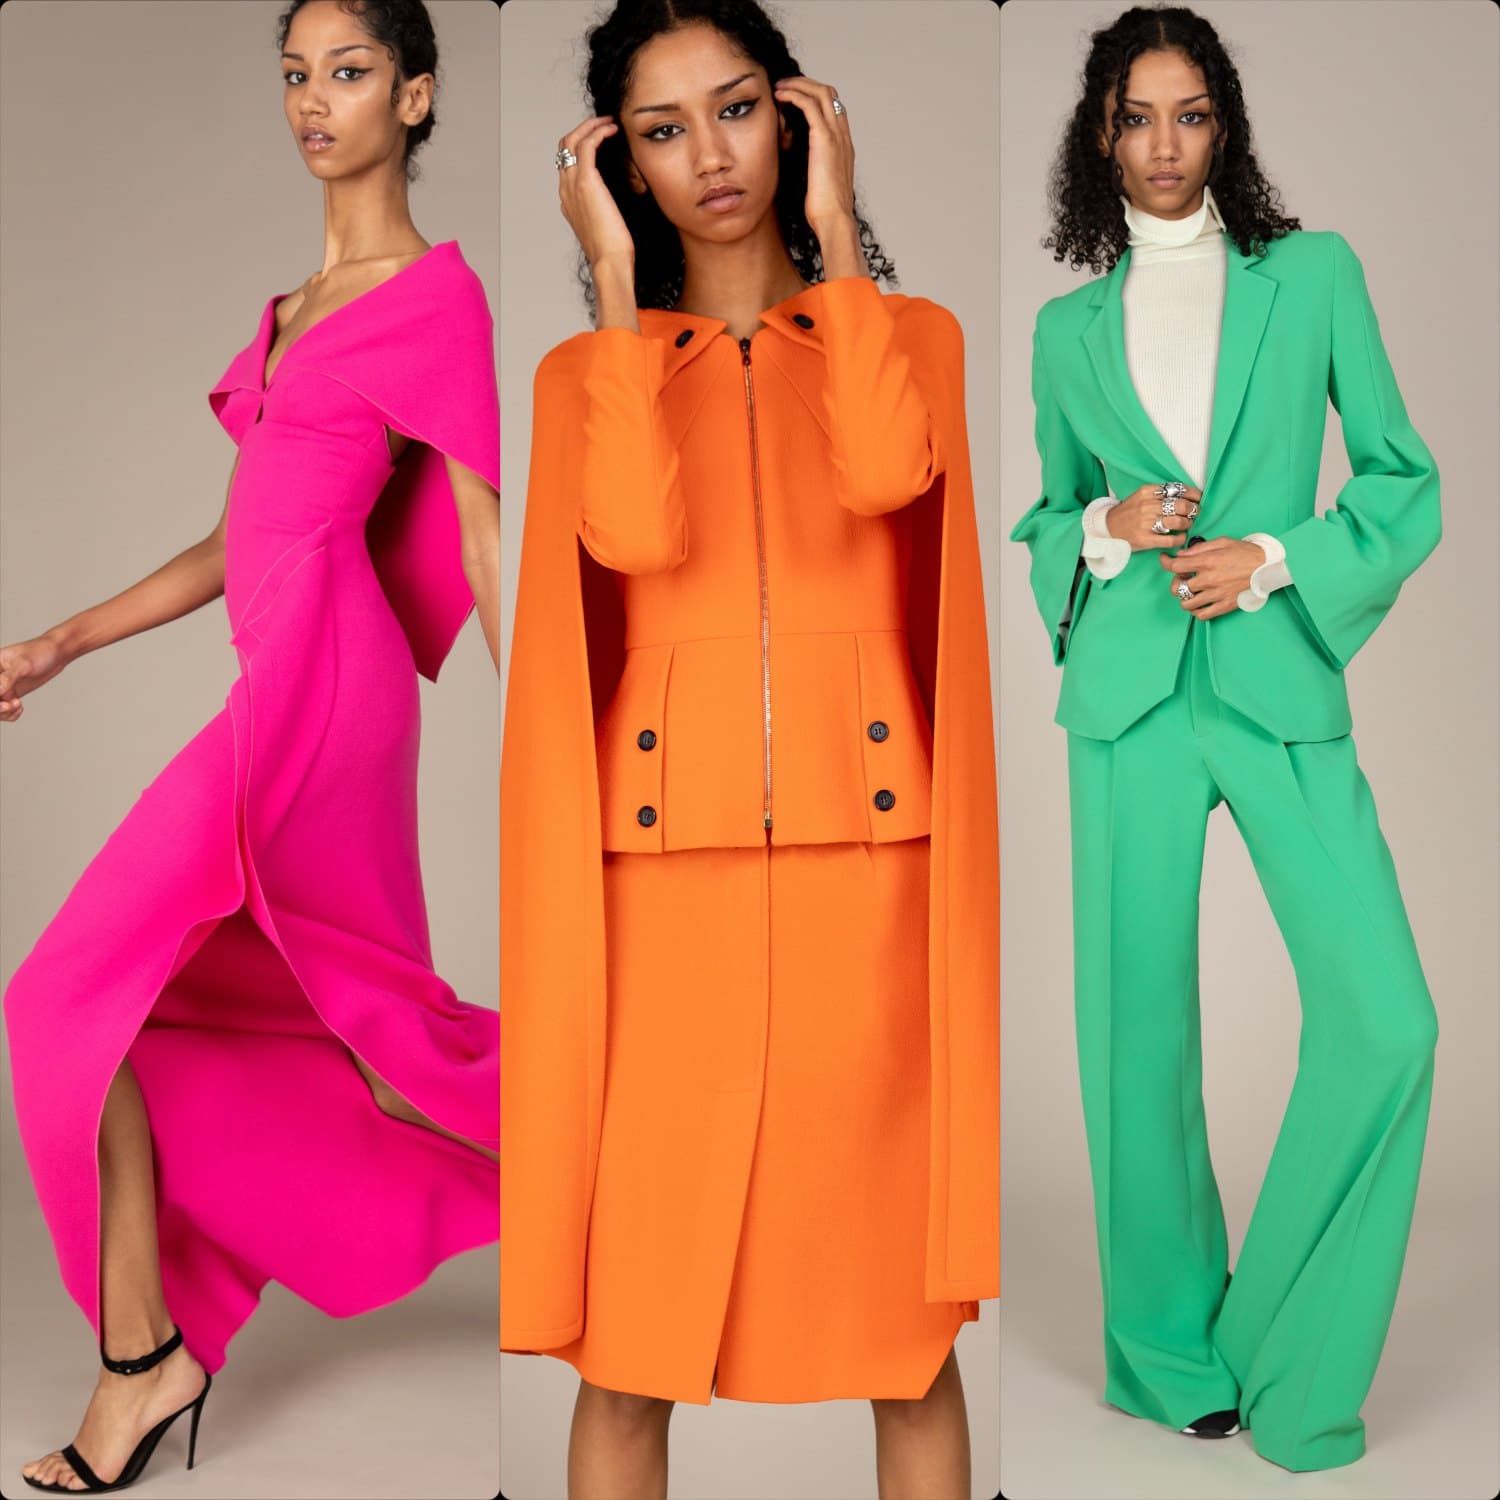 Roland Mouret Fall-Winter 2021-2022 London - RUNWAY MAGAZINE ® Collections